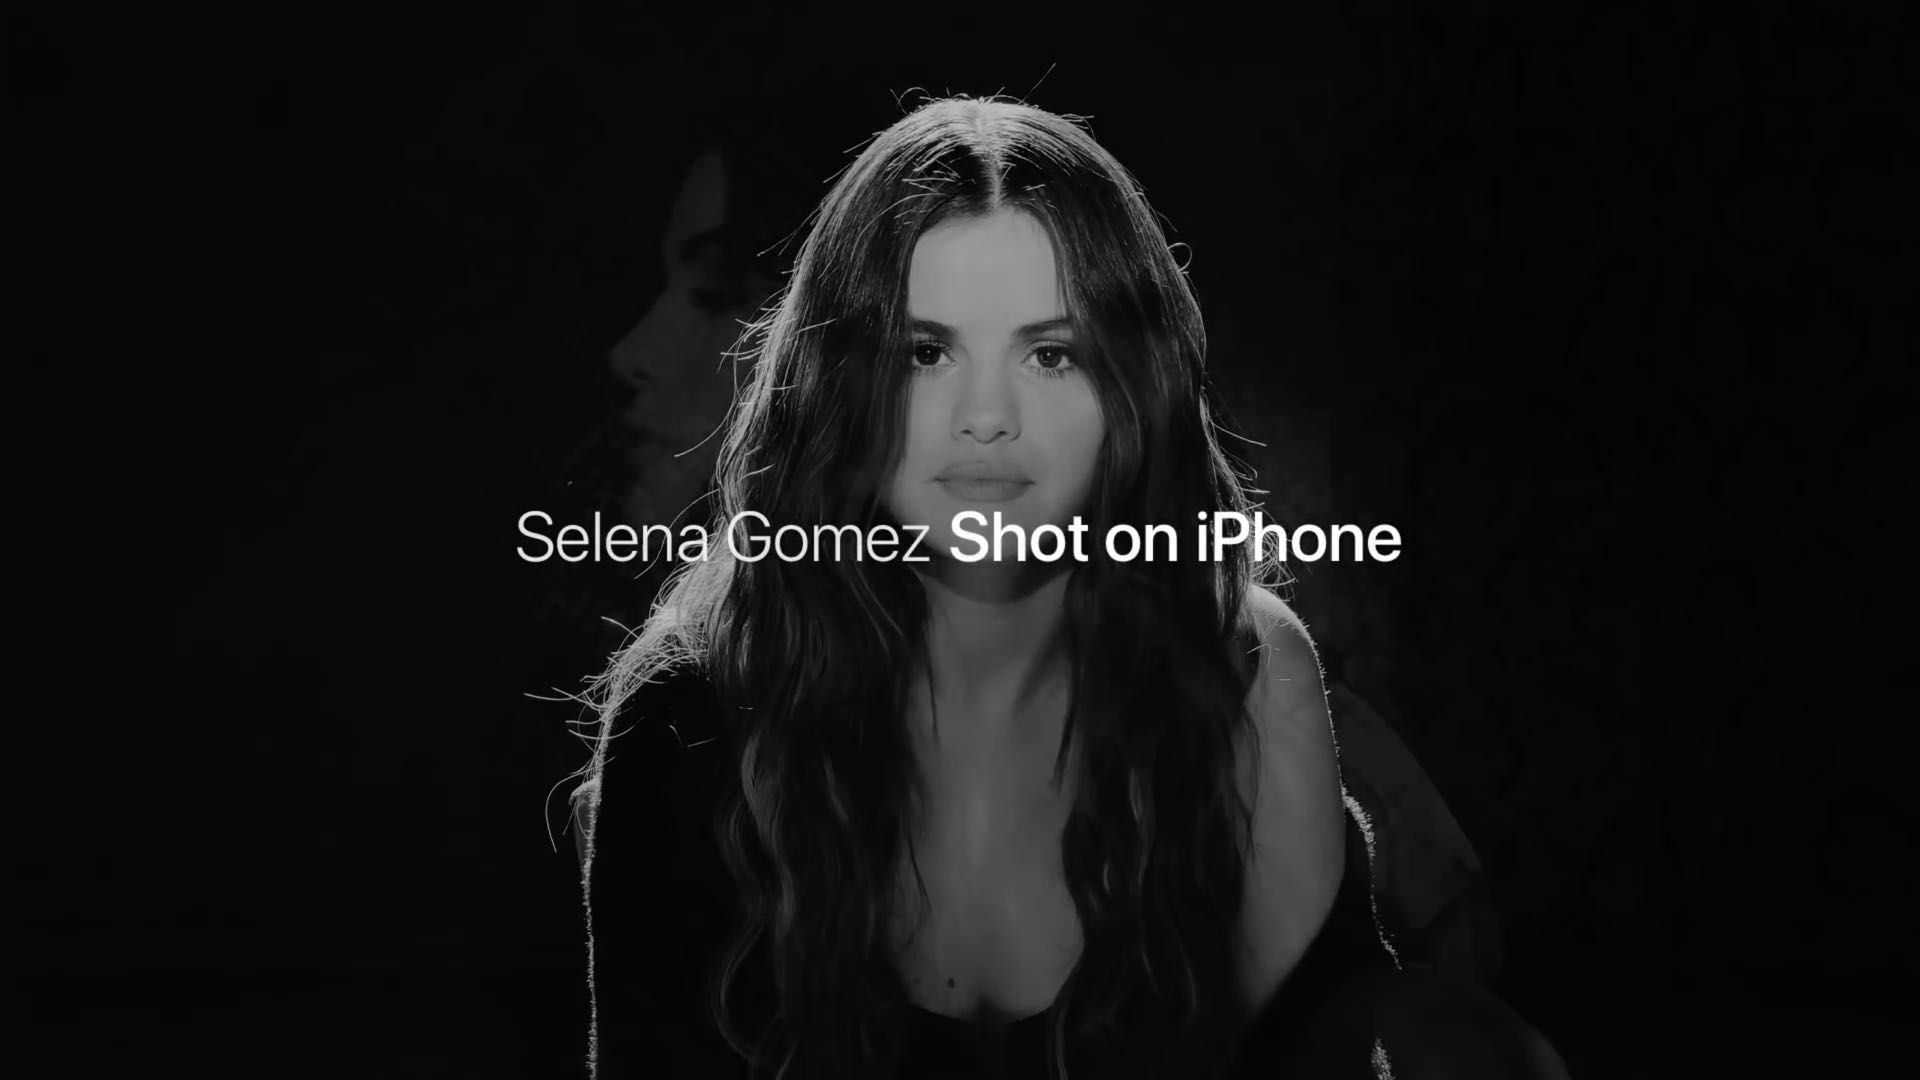 Video: Selena Gomez's music video 'Lose You To Love Me' was shot entirely on iPhone 11 Pro